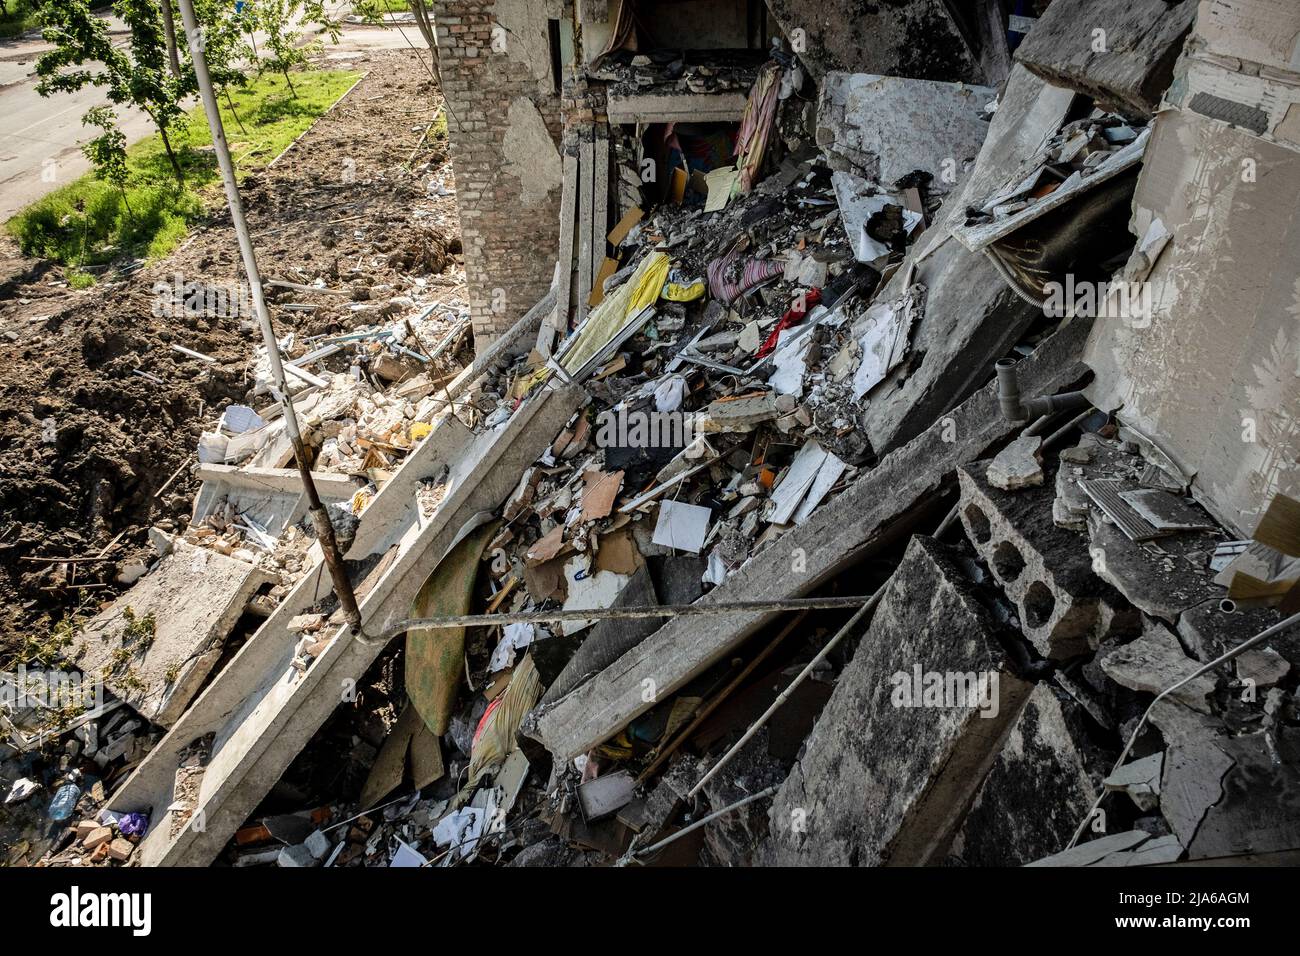 Bakhmut, Dontesk Oblast, Ukraine. 24th May, 2022. Ruins and debris of a residential building in Bakhmut, Donbas. As Bakhmut stands as a key city to Ukrainian forces in defending Donetsk(Donbas) region, the city is under attack by the Russian troops. The Russian invasion of Ukraine started on February 24, the war that has killed numerous civilians and soldiers. (Credit Image: © Alex Chan Tsz Yuk/SOPA Images via ZUMA Press Wire) Stock Photo